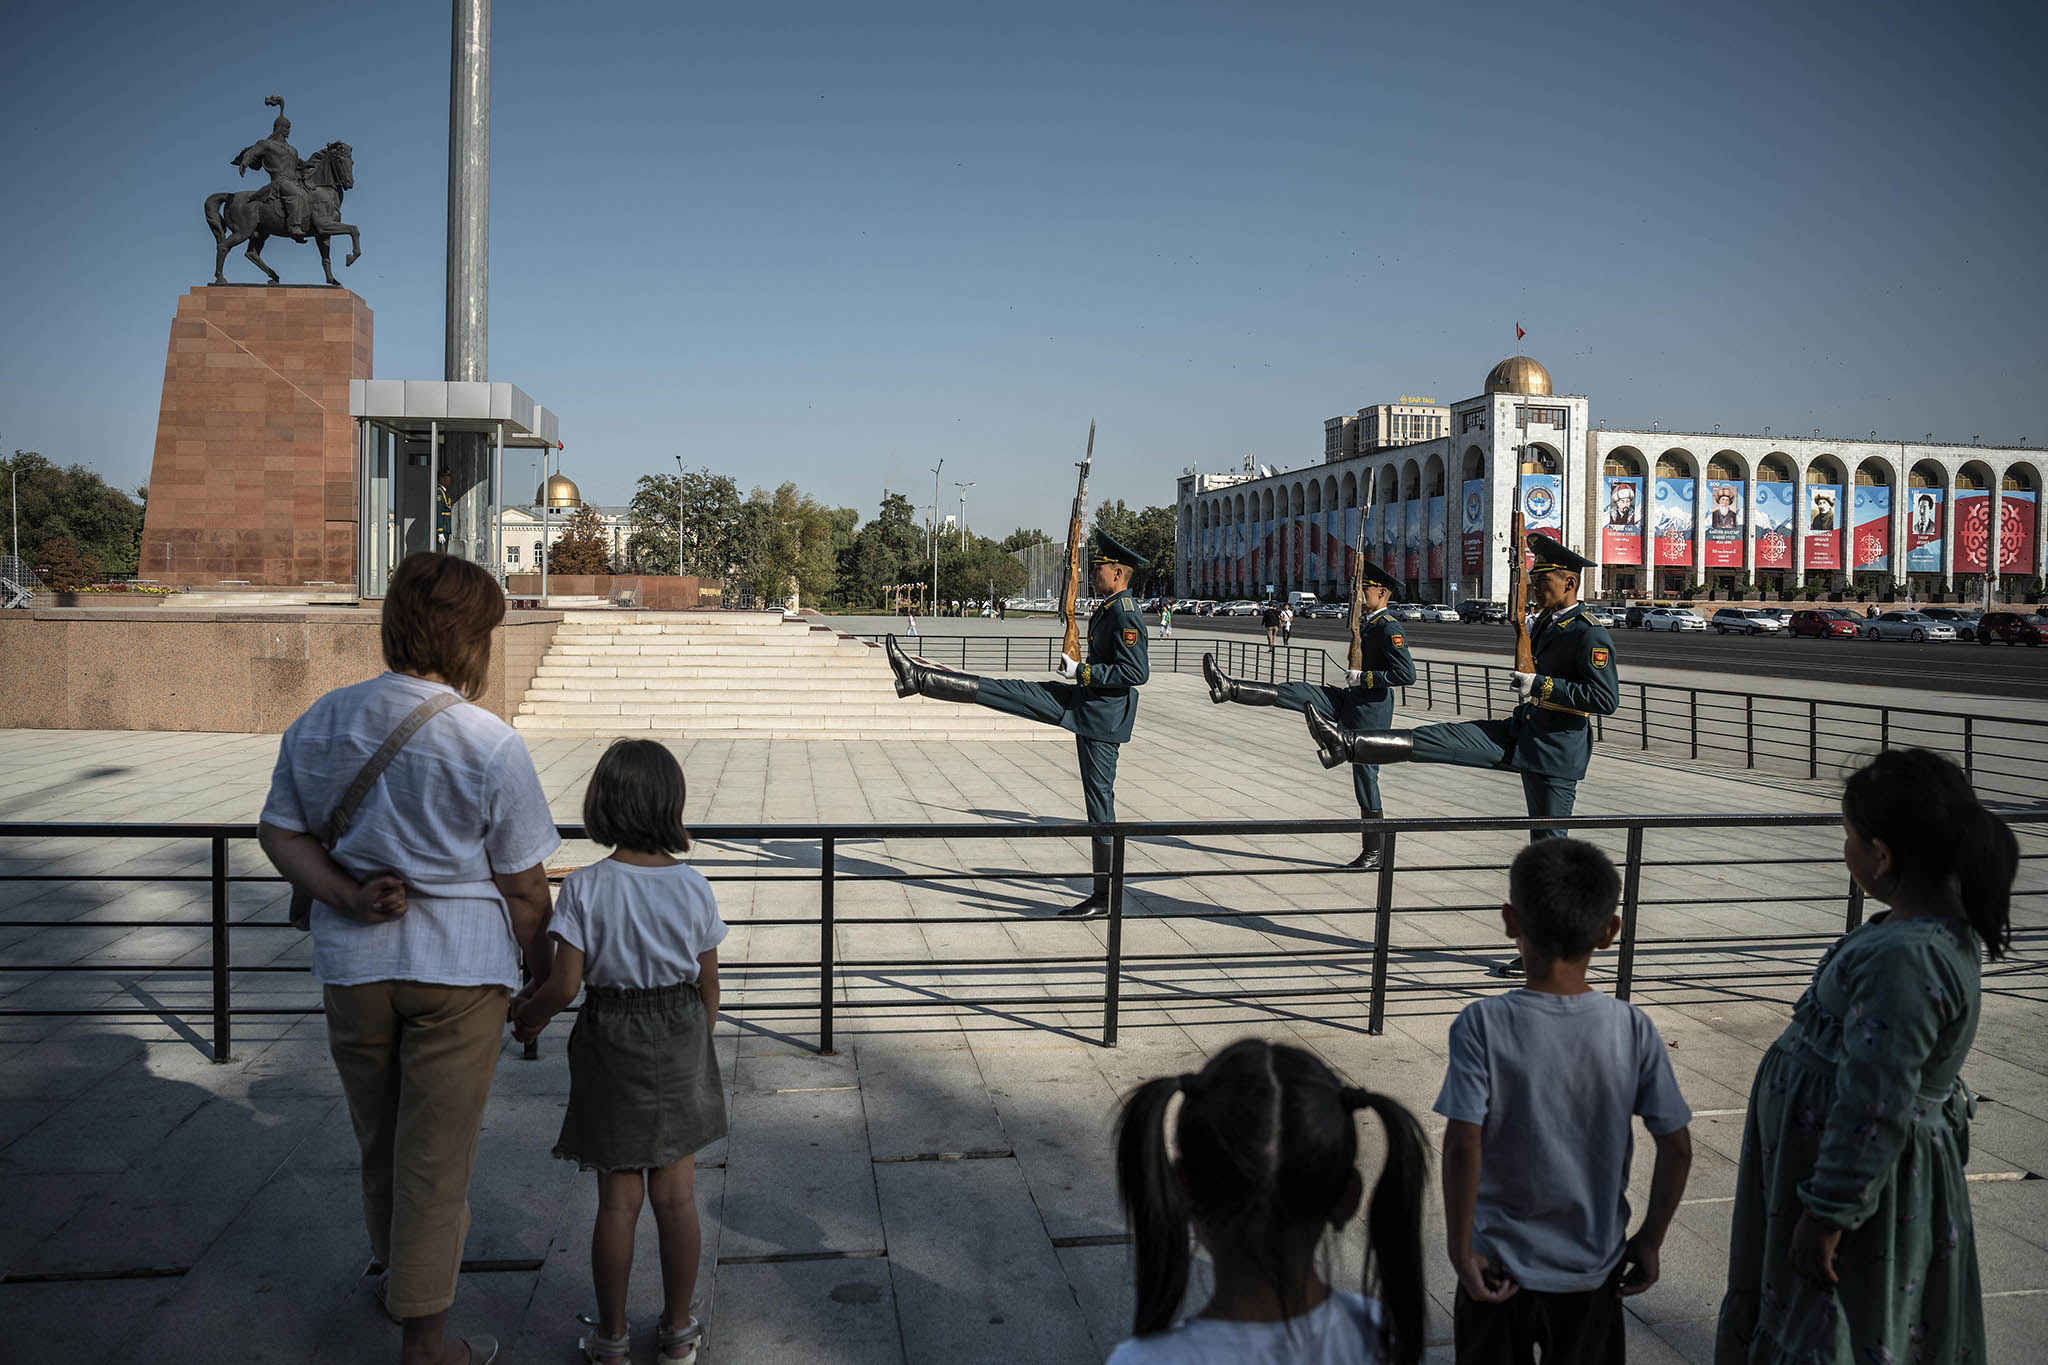 Visitors watch at the World War II memorial in central Bishkek, Kyrgyzstan, Sept. 26, 2022. With Russia distracted in Ukraine, Central Asian leaders are looking for a reliable partner to help ensure domestic stability. (Sergey Ponomarev/The New York Times)